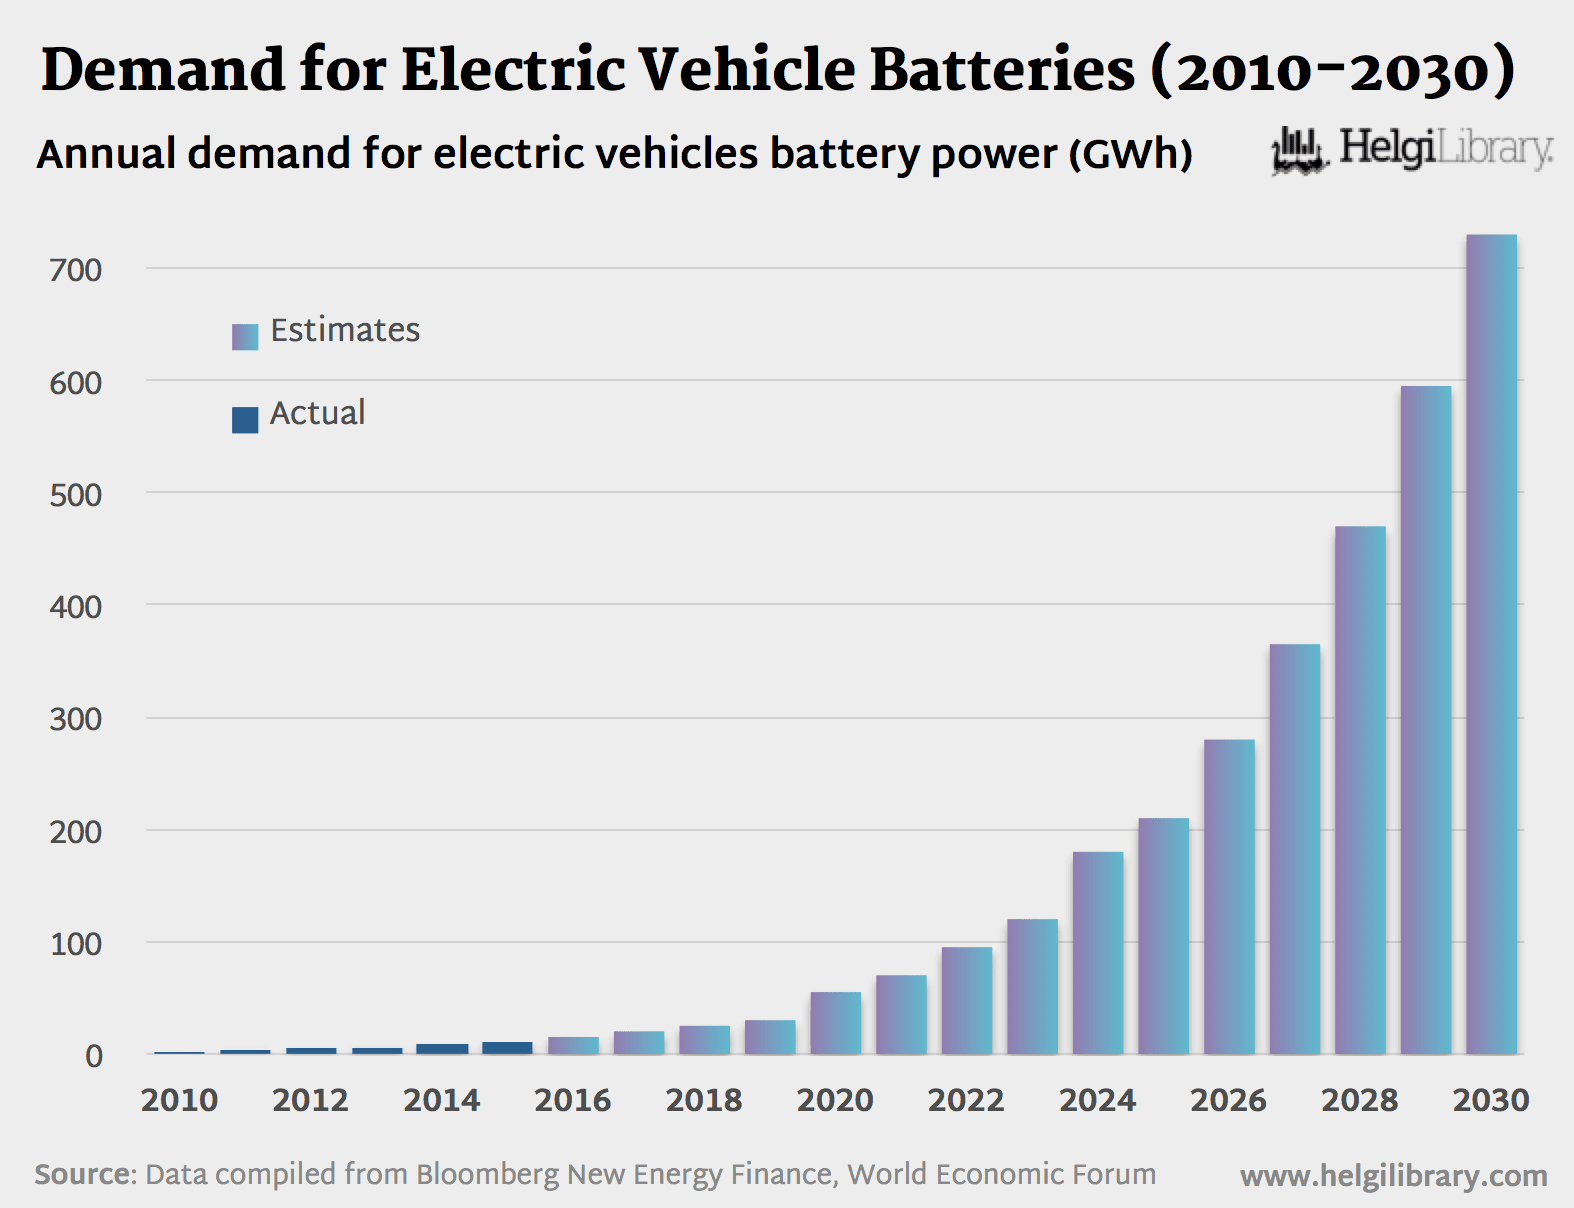 Bar chart: Upward trend in demand for electric vehicle batteries between 2010 and 2030